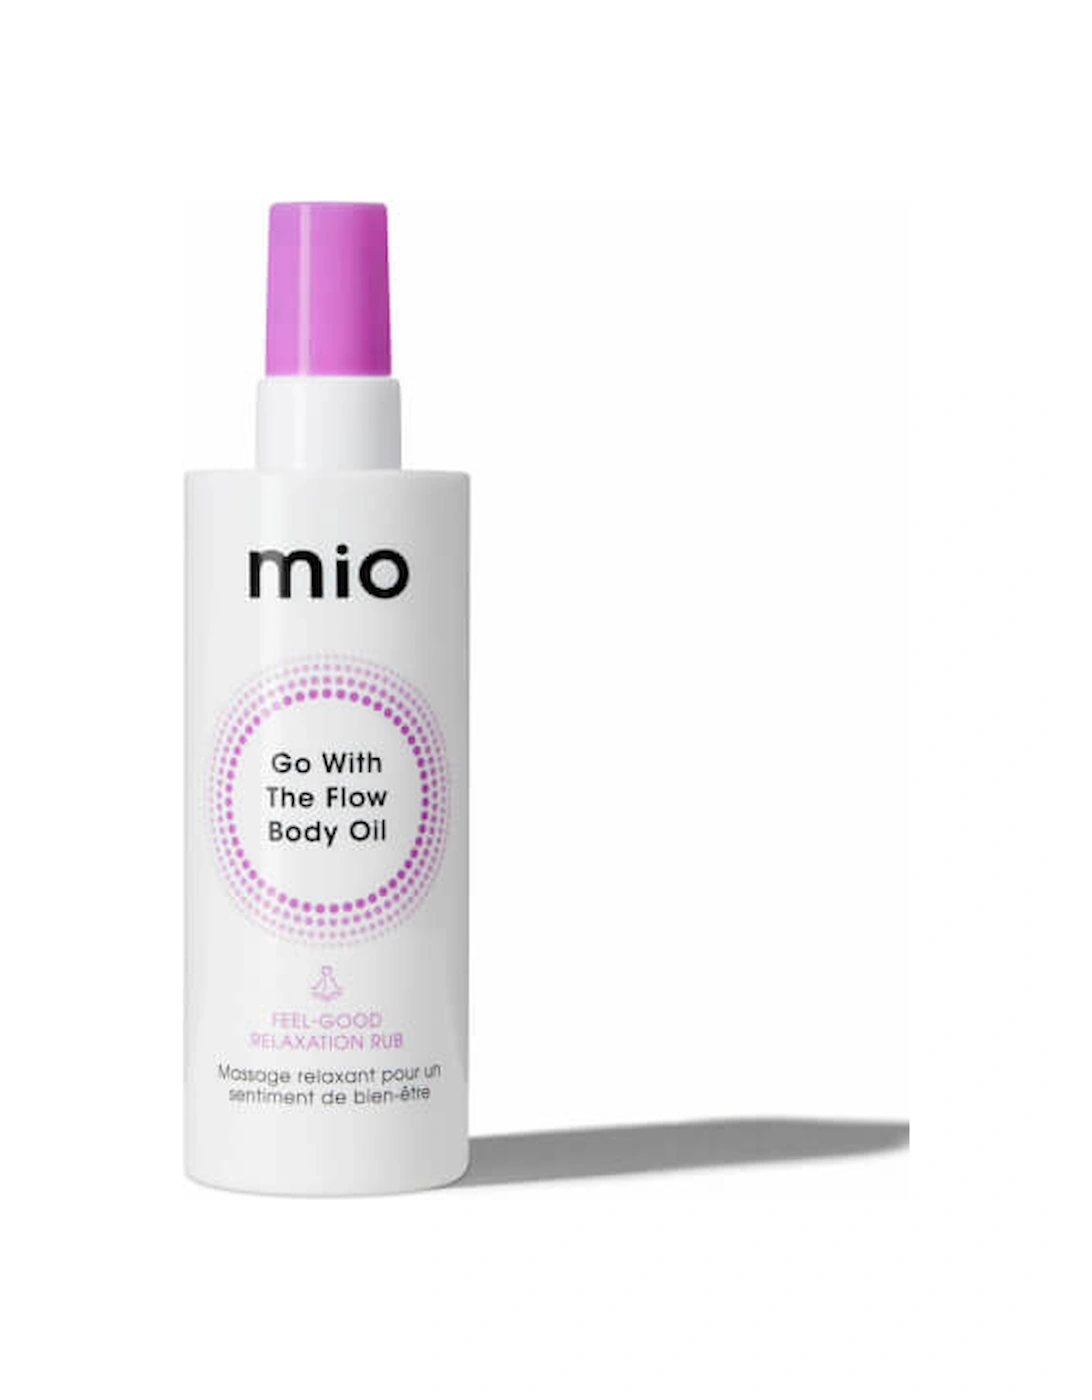 Mio Go with the Flow Body Oil 130ml - - Mio Go with the Flow Body Oil 130ml - Julie, 2 of 1